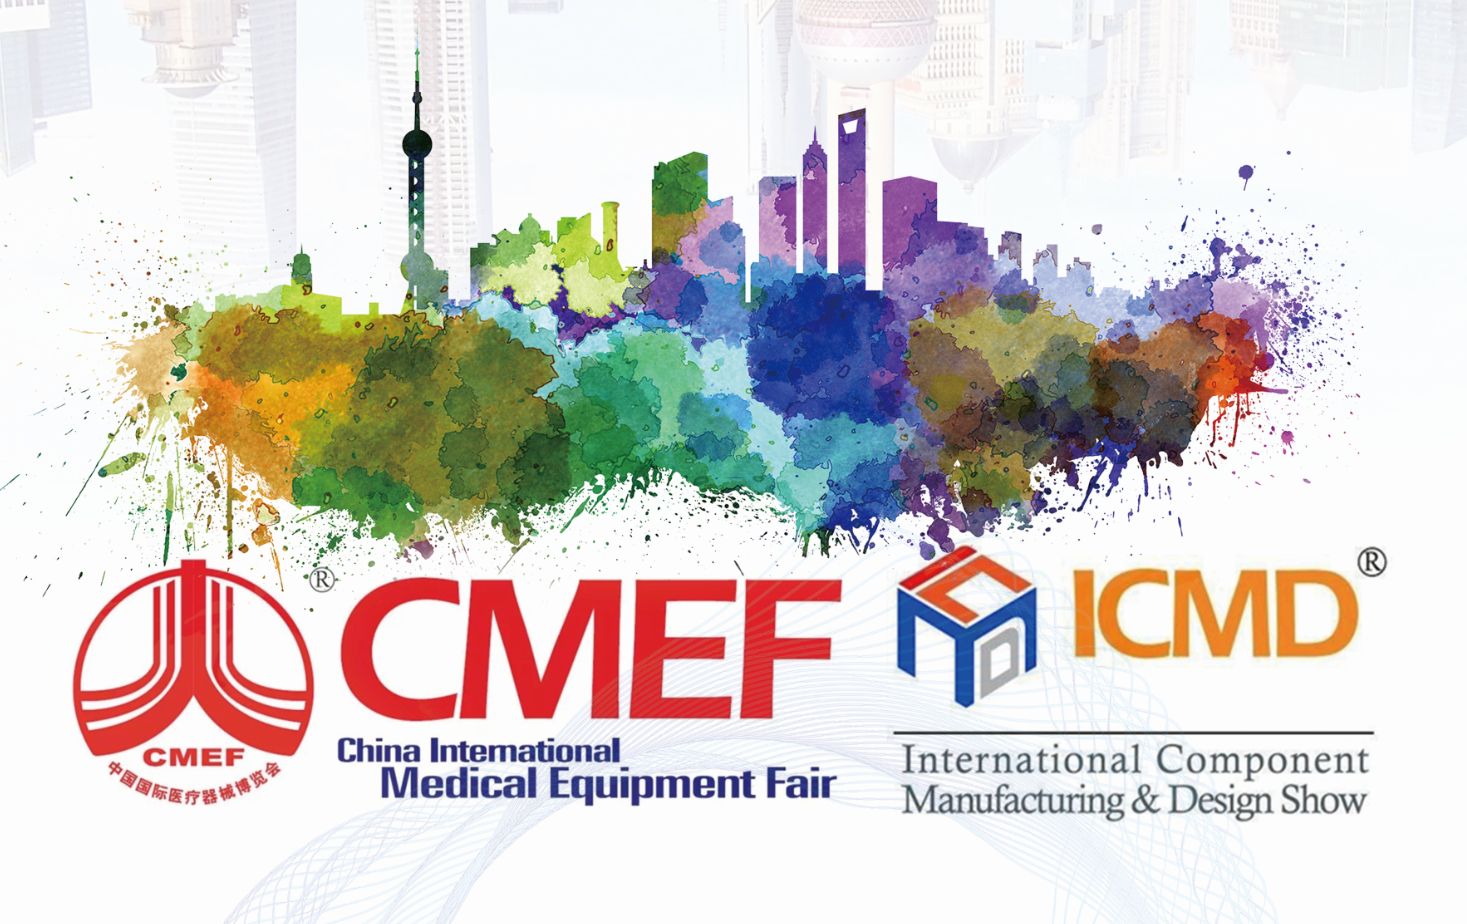 CMEF/ICMD Spring 2021 is coming!